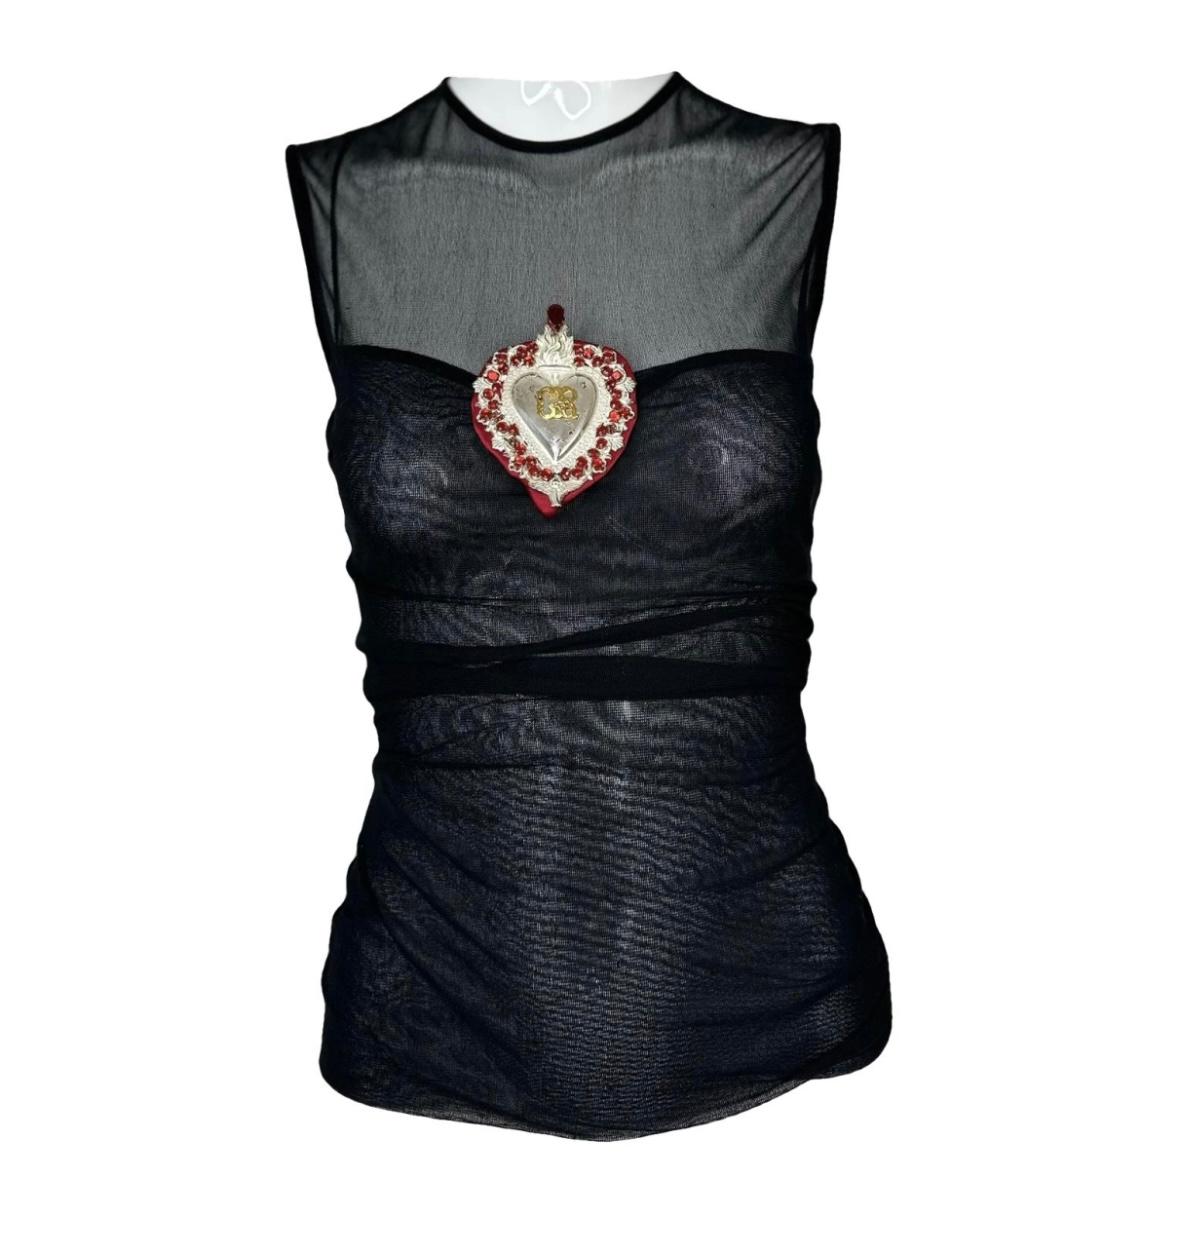 Collector’s item!

Dolce Gabbana 1998 Stromboli collection runway heart mesh top 

Size 40, fits like XS-S
Good vi rage condition with some signs of wear and age. Please see photos 

Zipper in the back